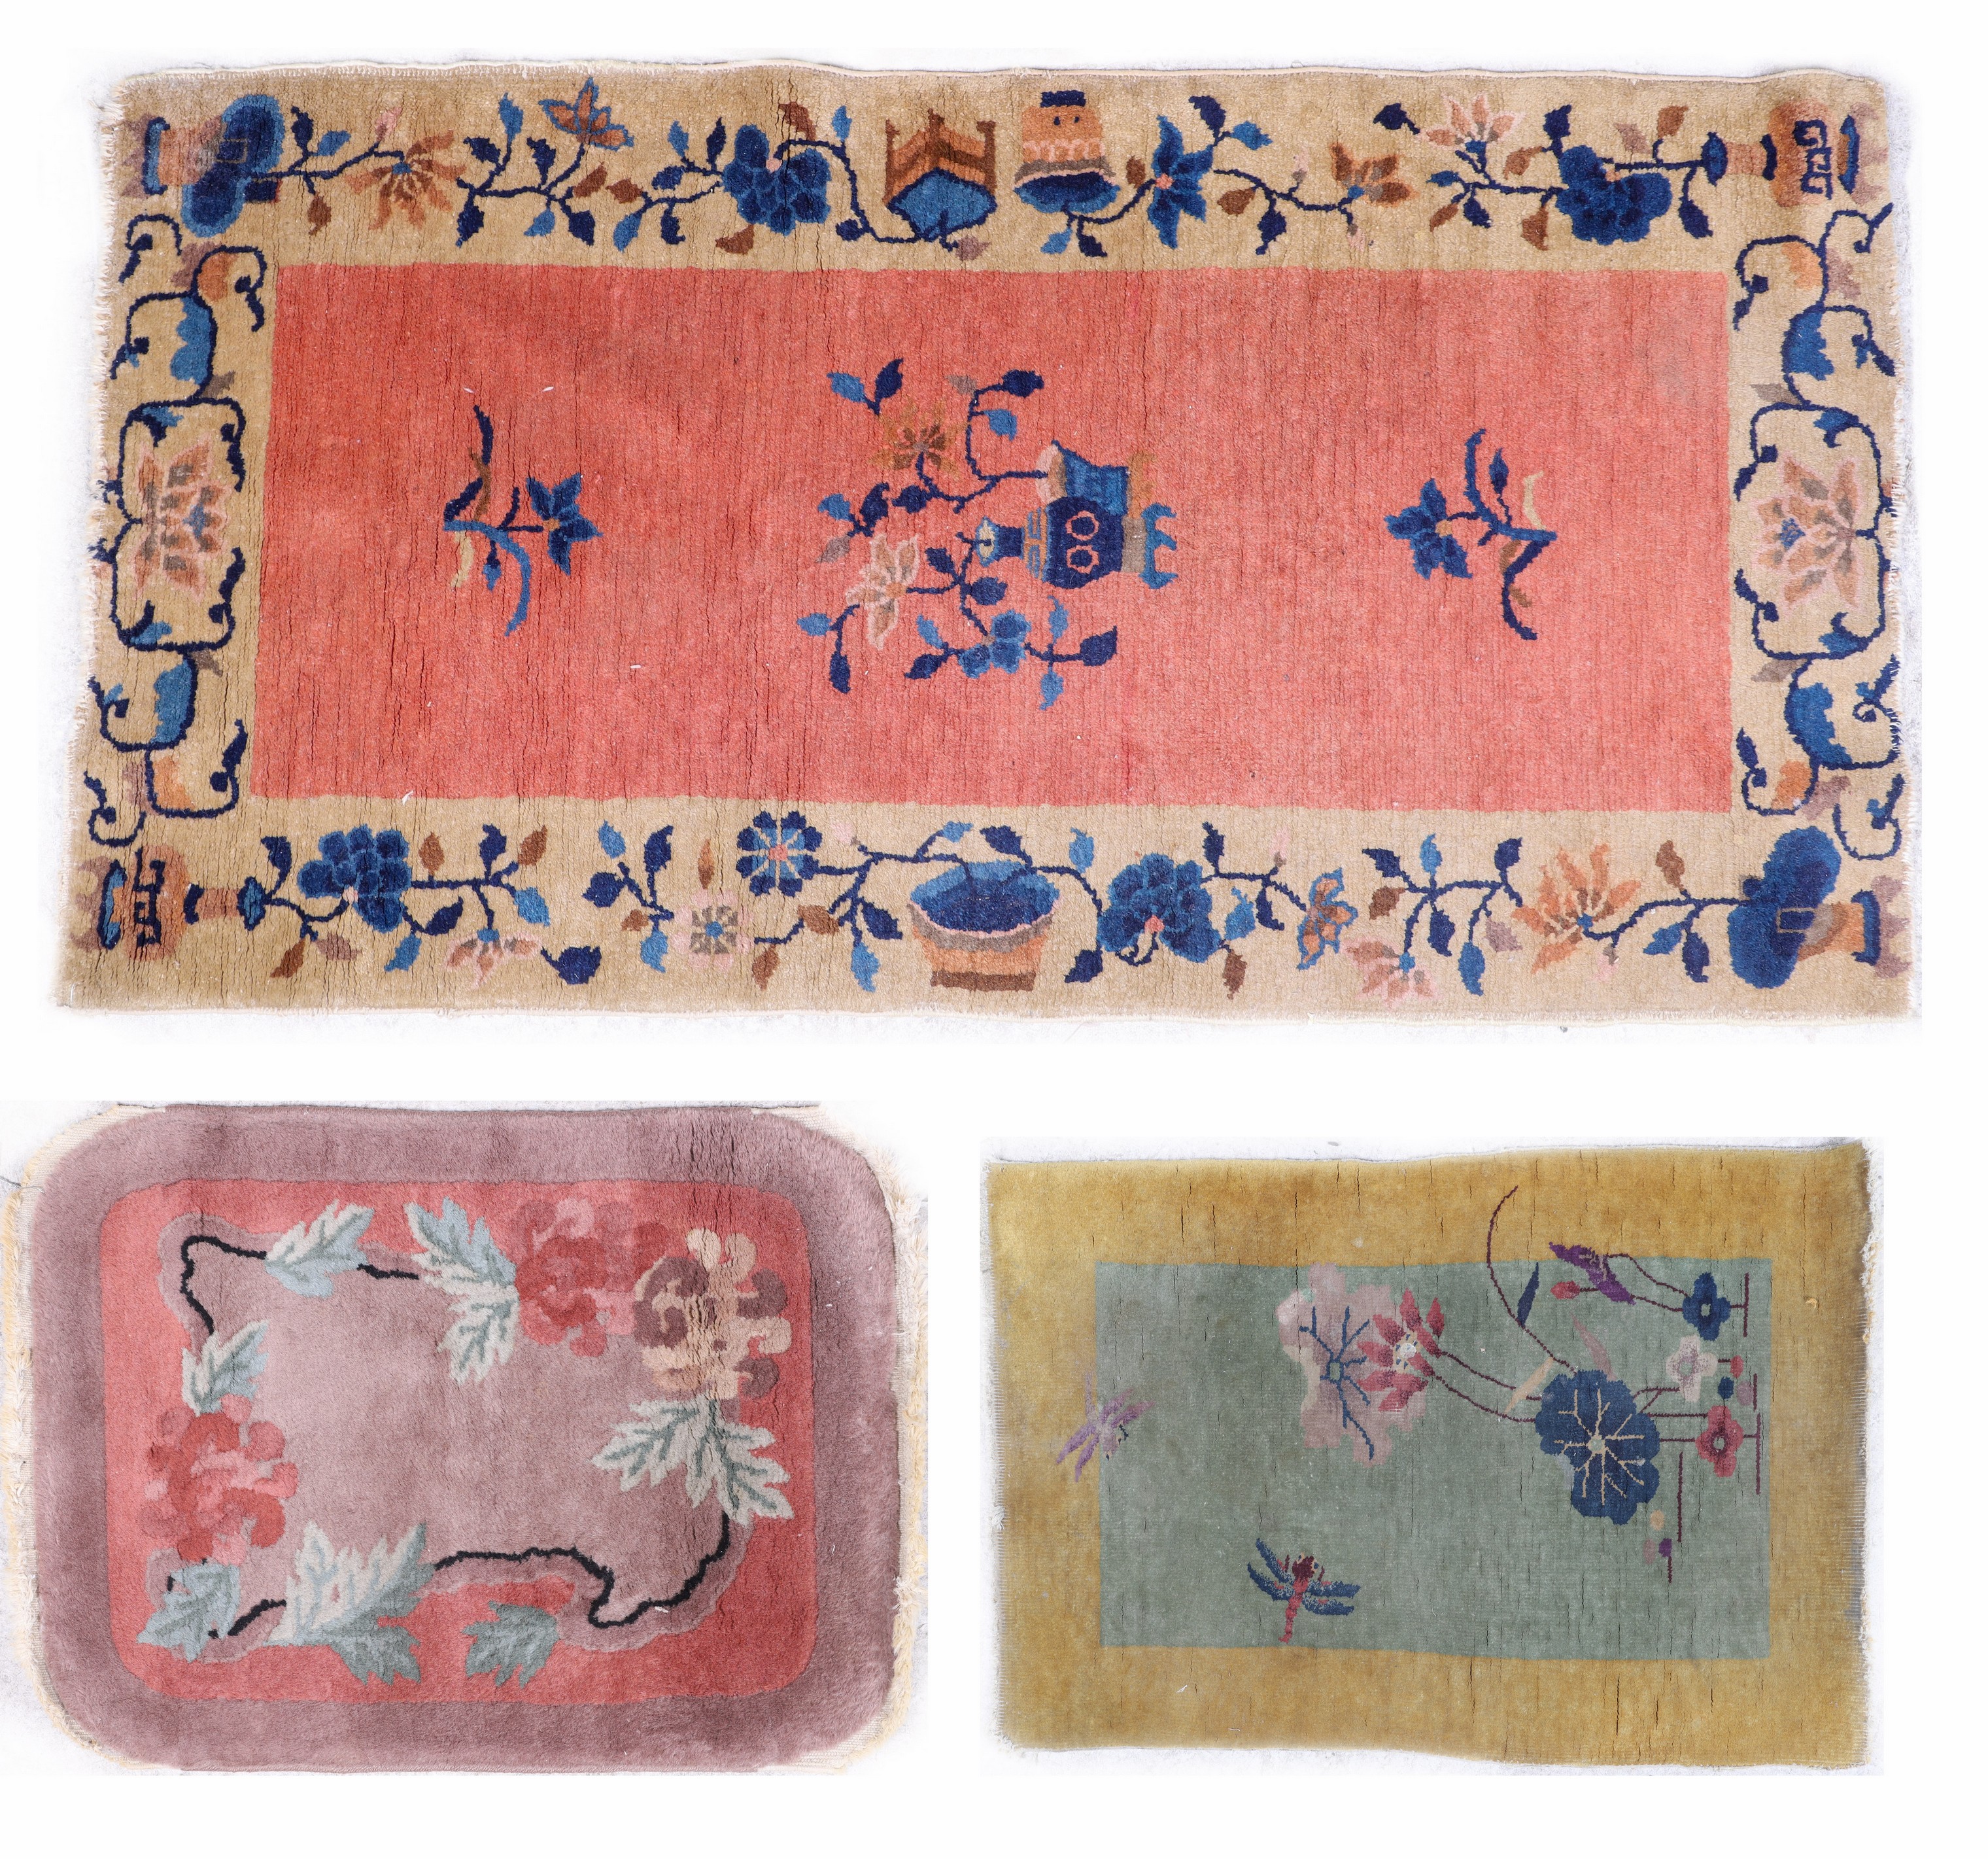  3 Chinese Throw rugs floral designs  2e0aea